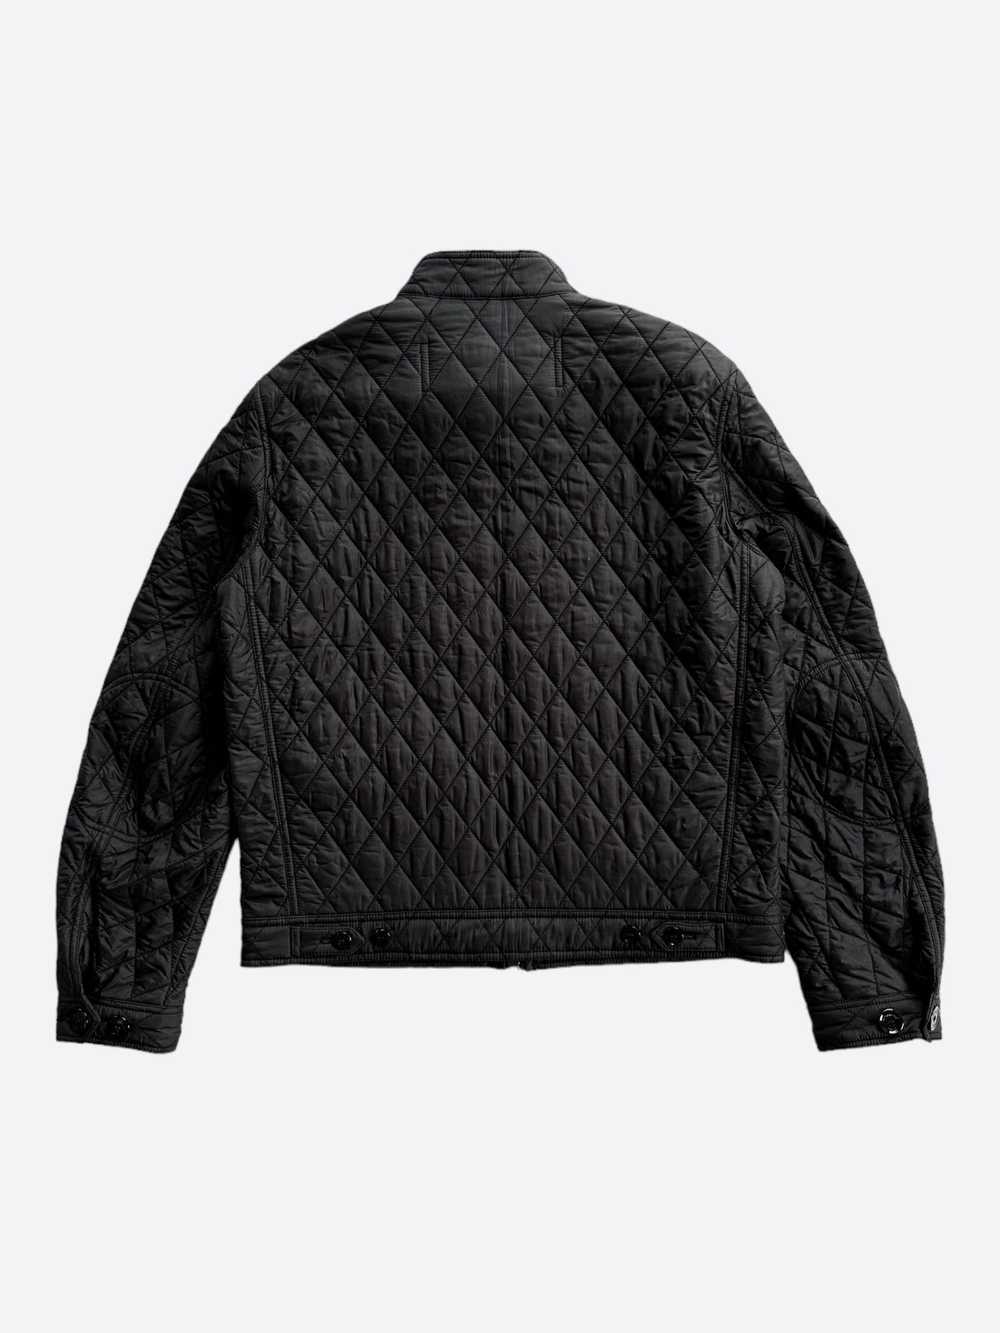 Burberry Burberry Brit Black Quilted Zip Up Jacket - image 2